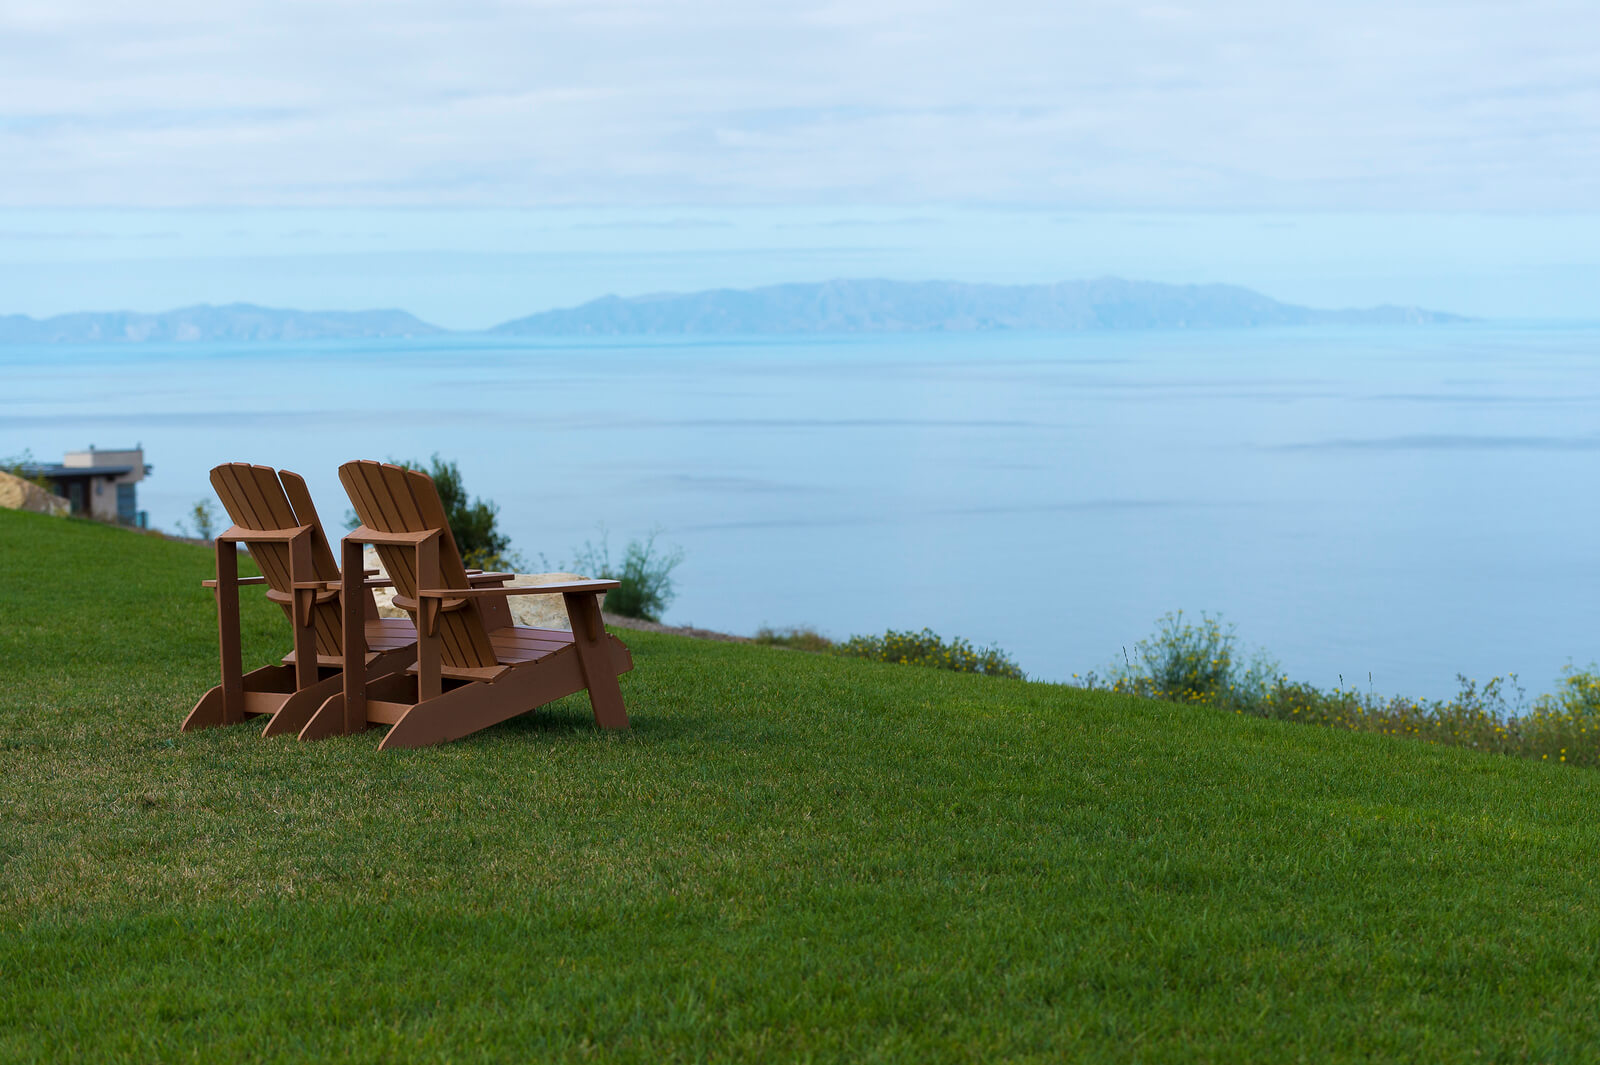 chairs on grass overlooking the ocean